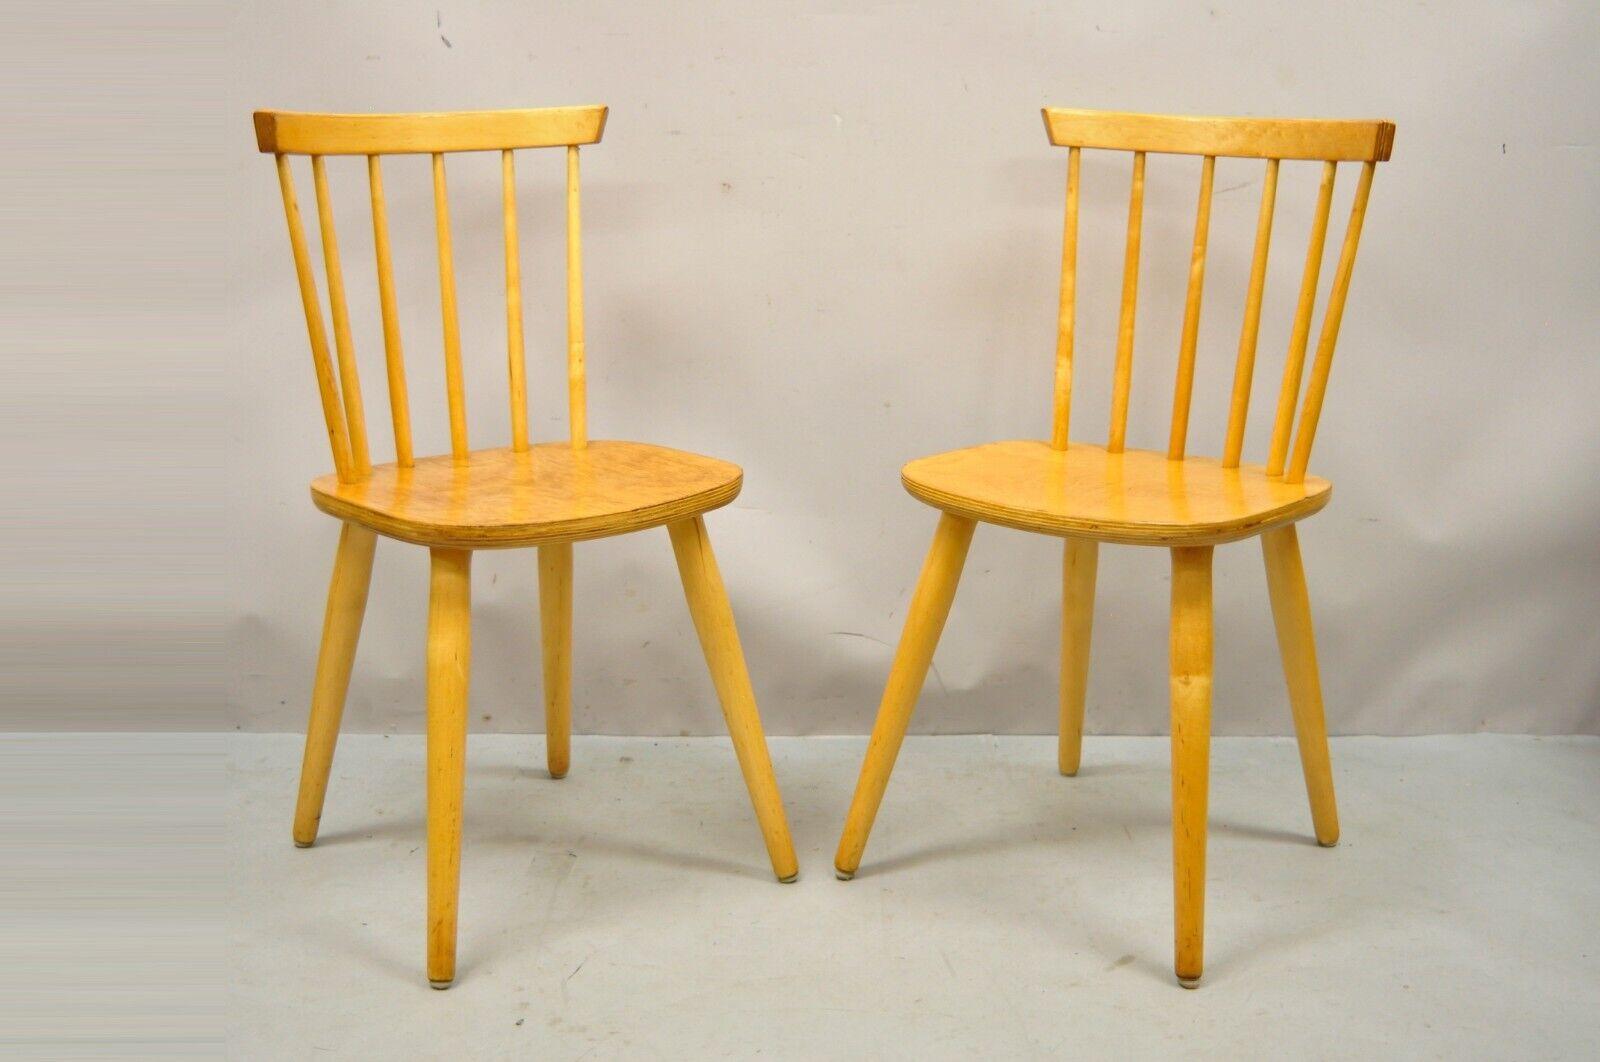 Vintage Mid-Century Modern Spindle Bush Birch Maple Side Chairs, a Pair For Sale 7